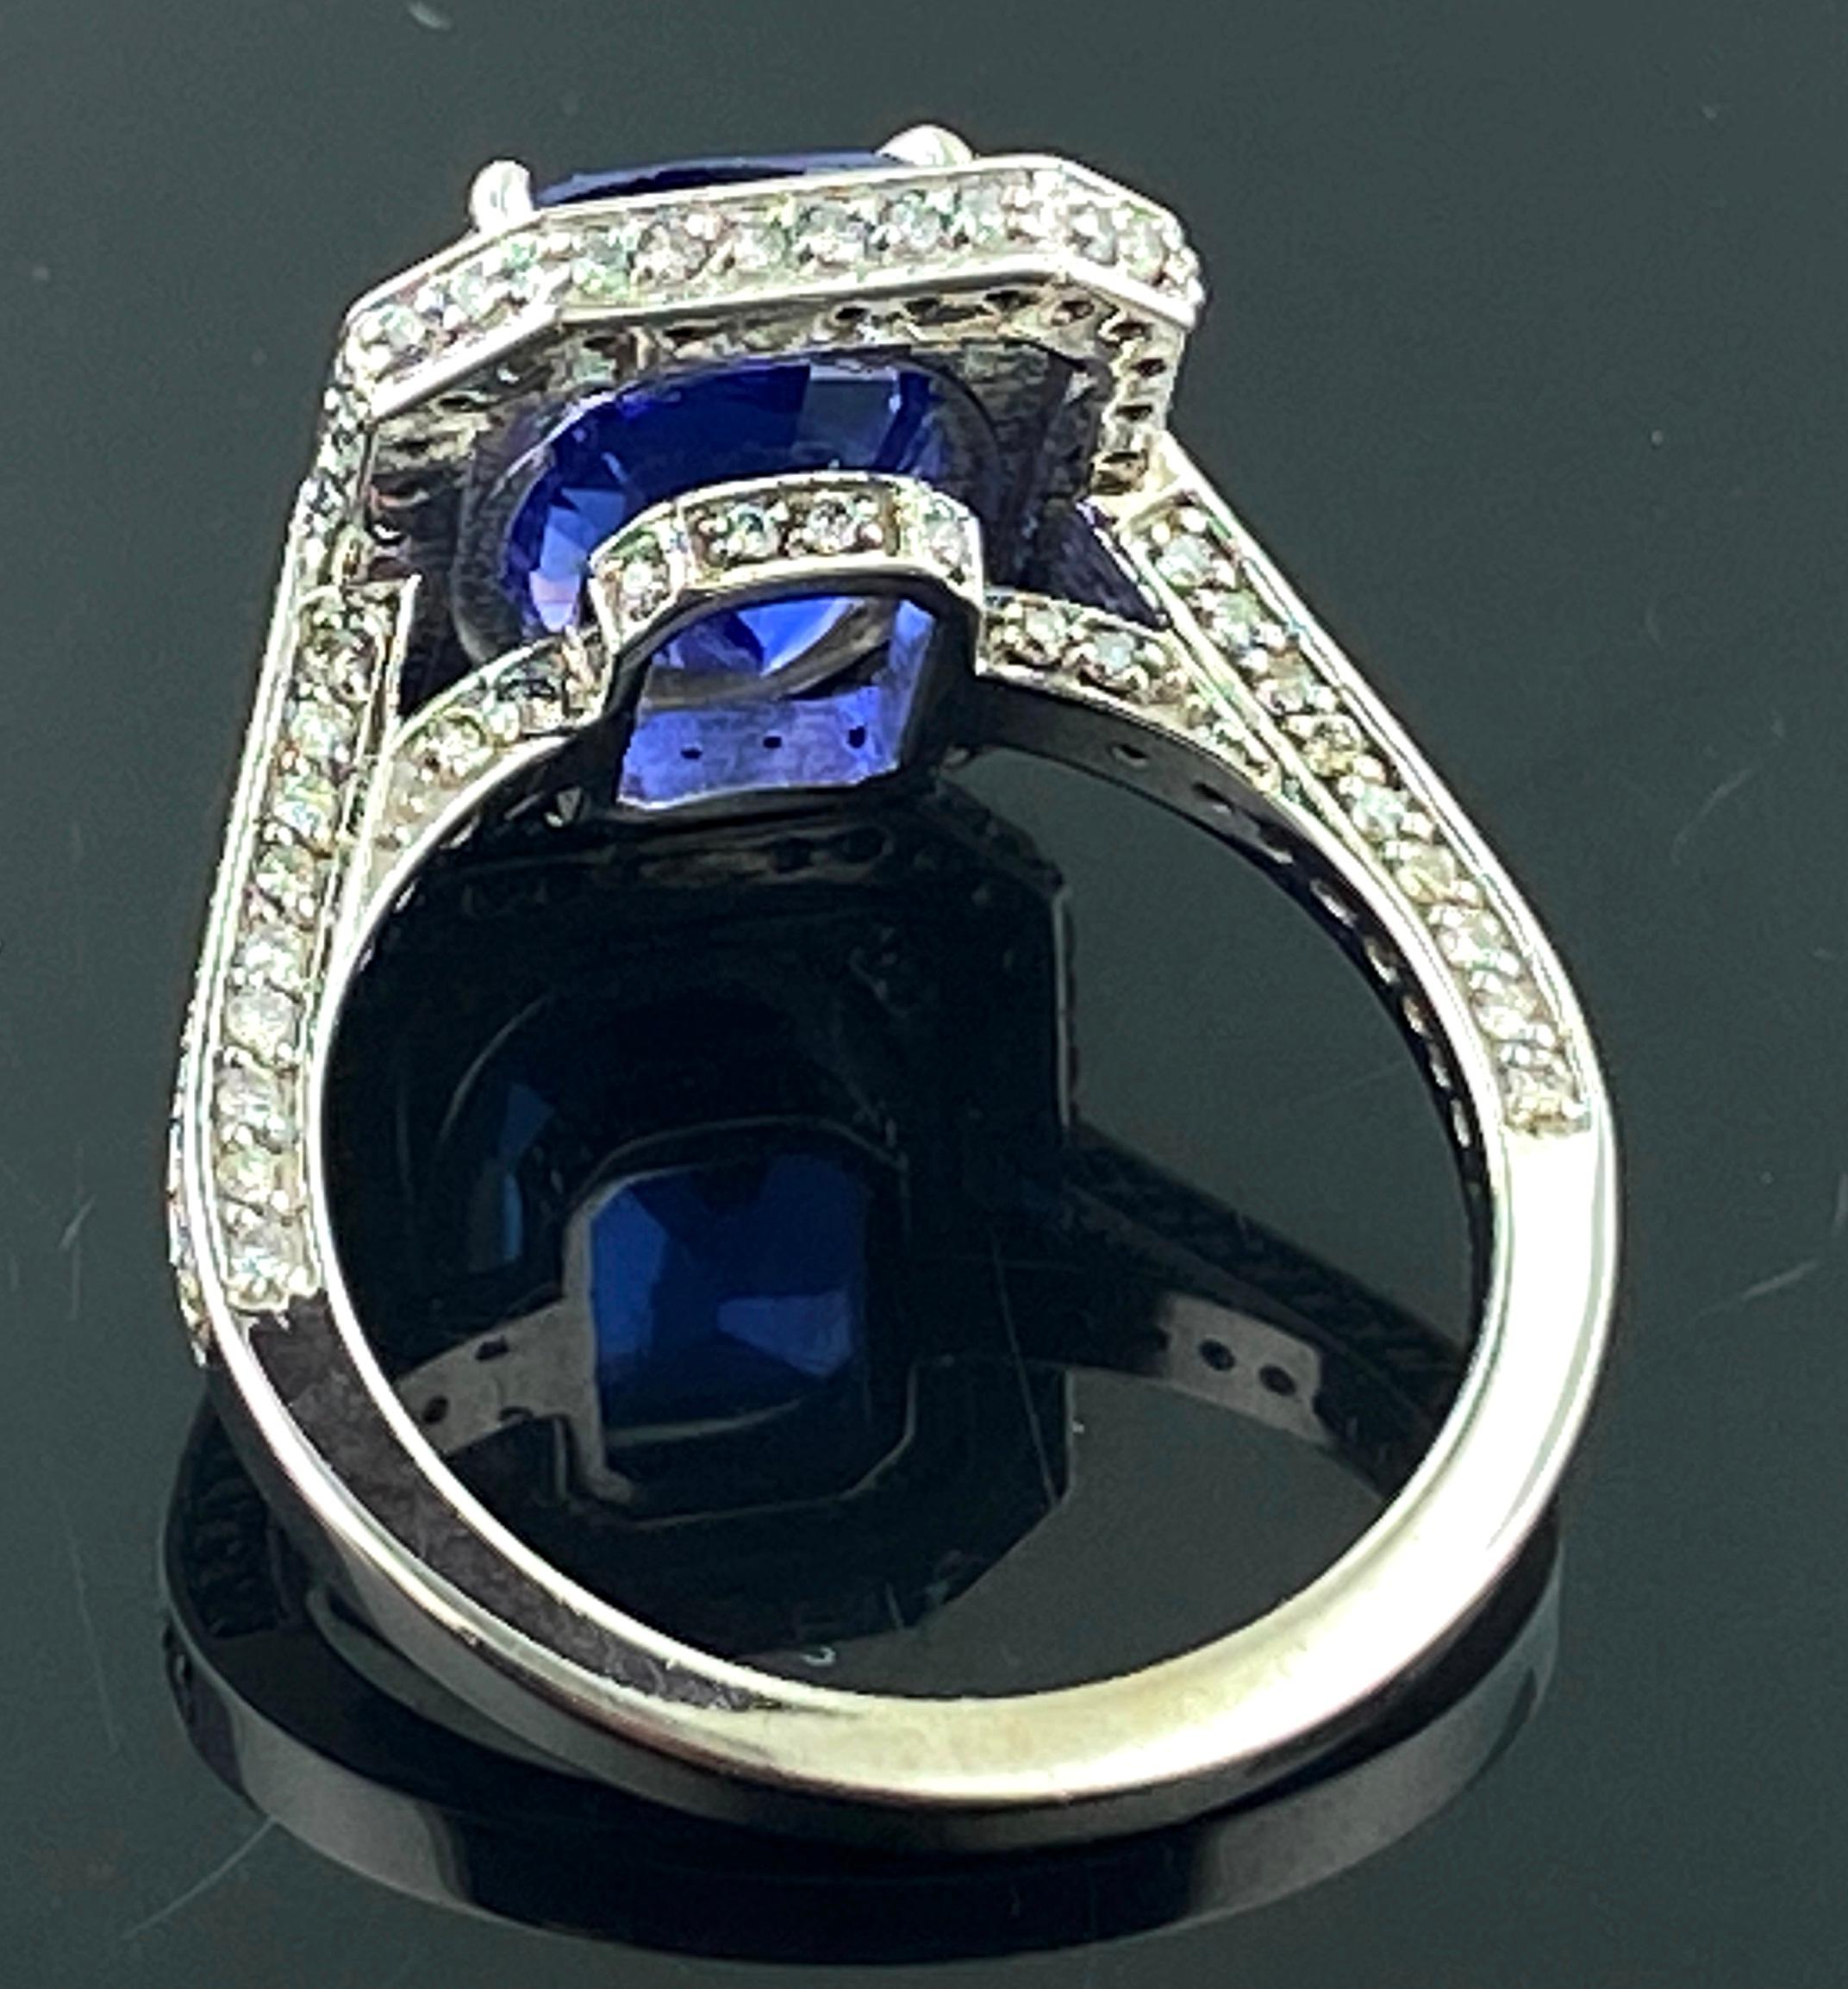 18 Kt White Gold 4.21 Carat Tanzanite and Diamond Ring In Excellent Condition For Sale In Palm Desert, CA